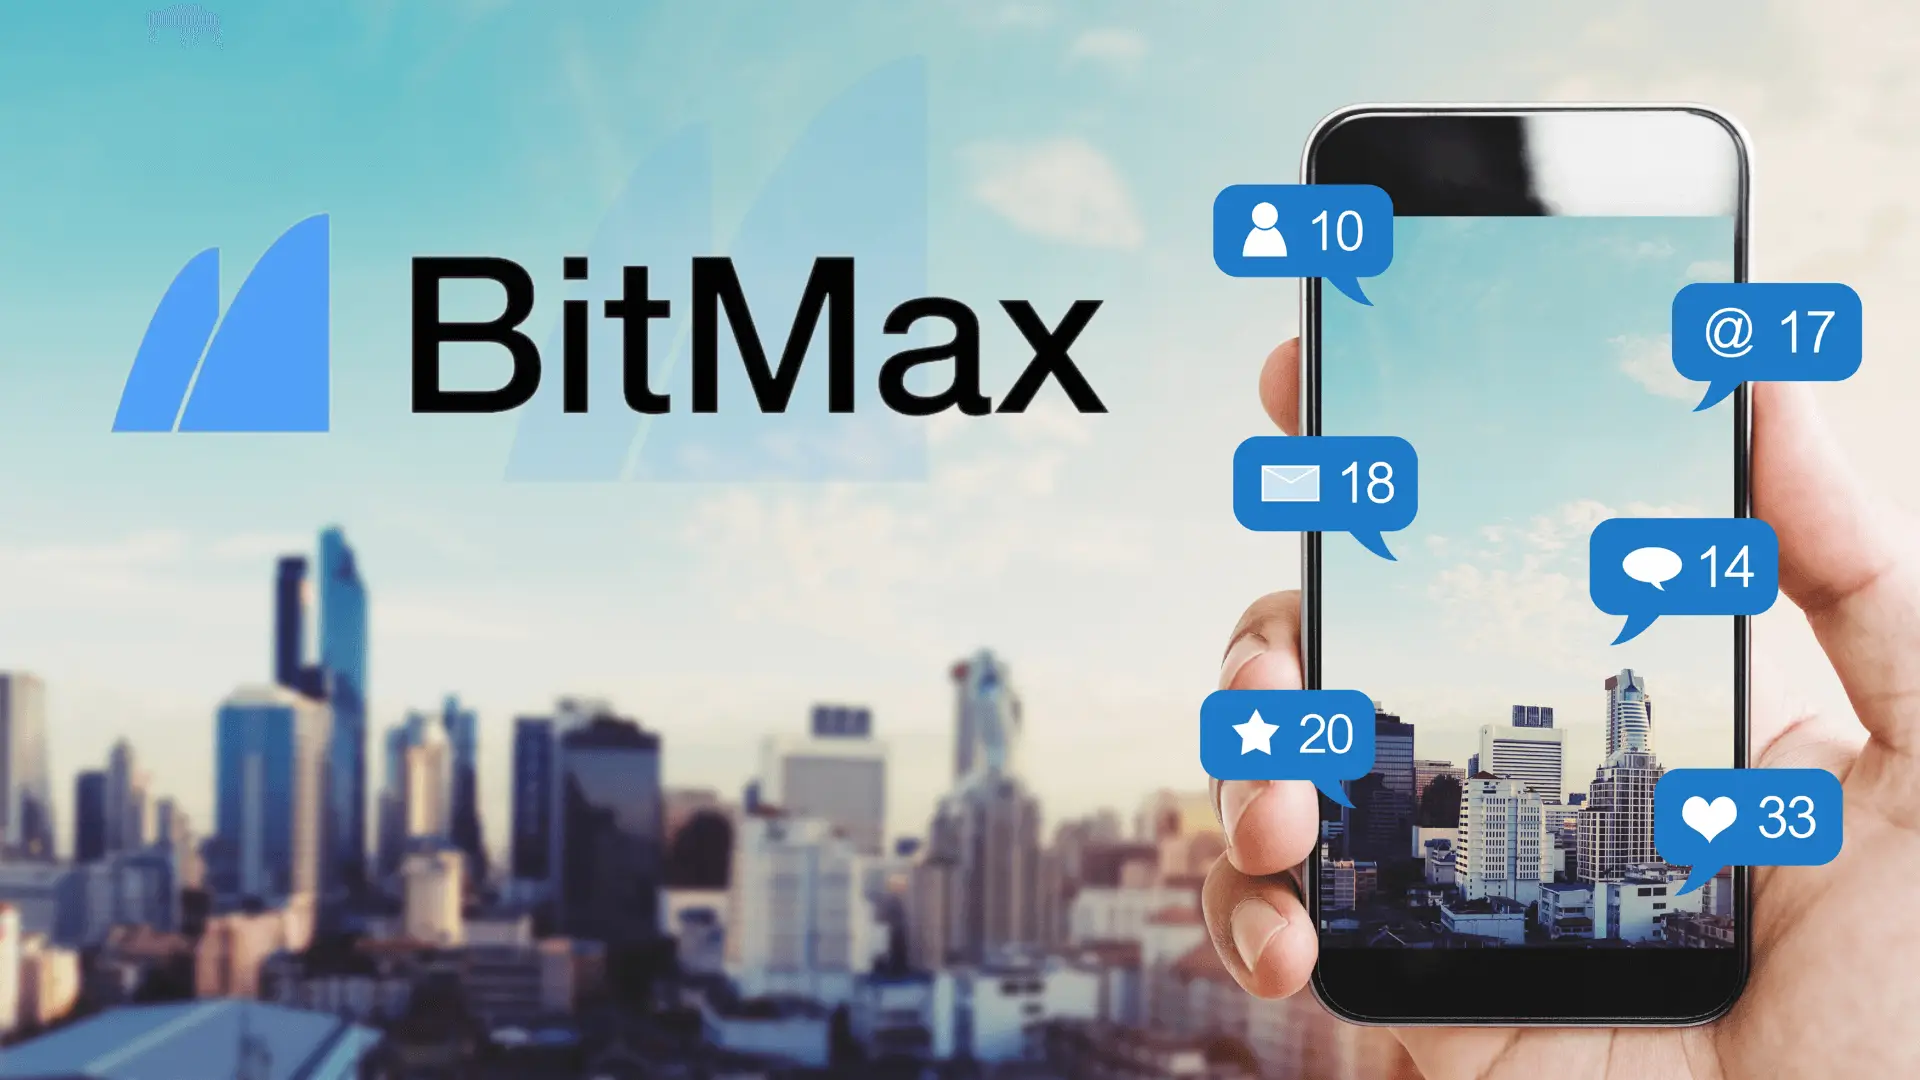 BitMax.io Implements a New SMS Notification Feature